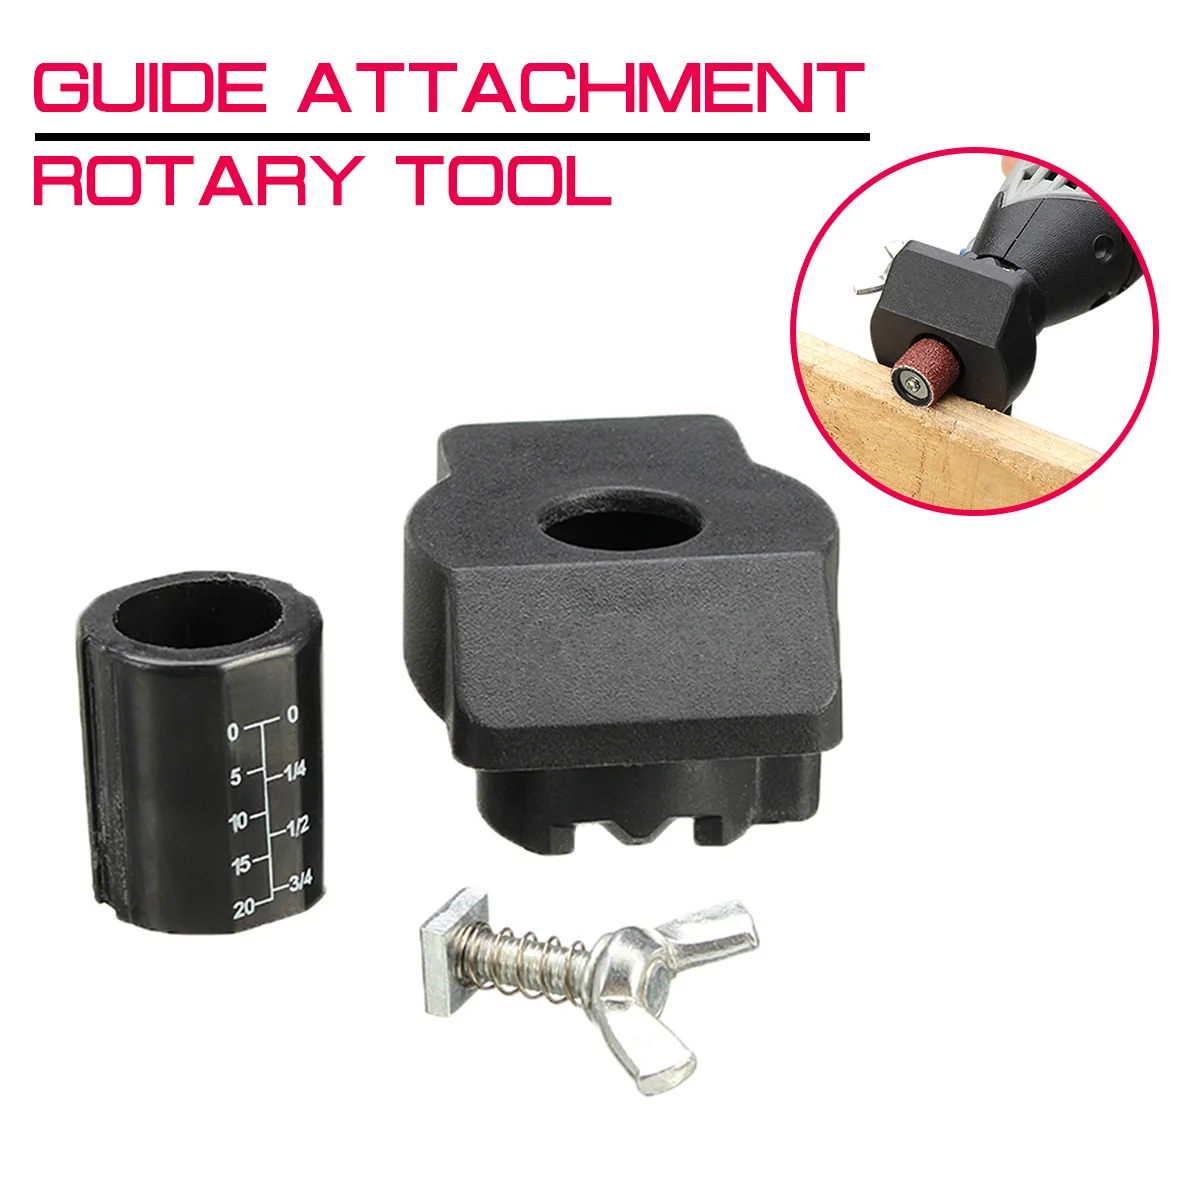 

For Woodworking DIY For Dremel and Hilda Sanding Grinding Guide Attachment Rotary Tool Accessories Mini Drill